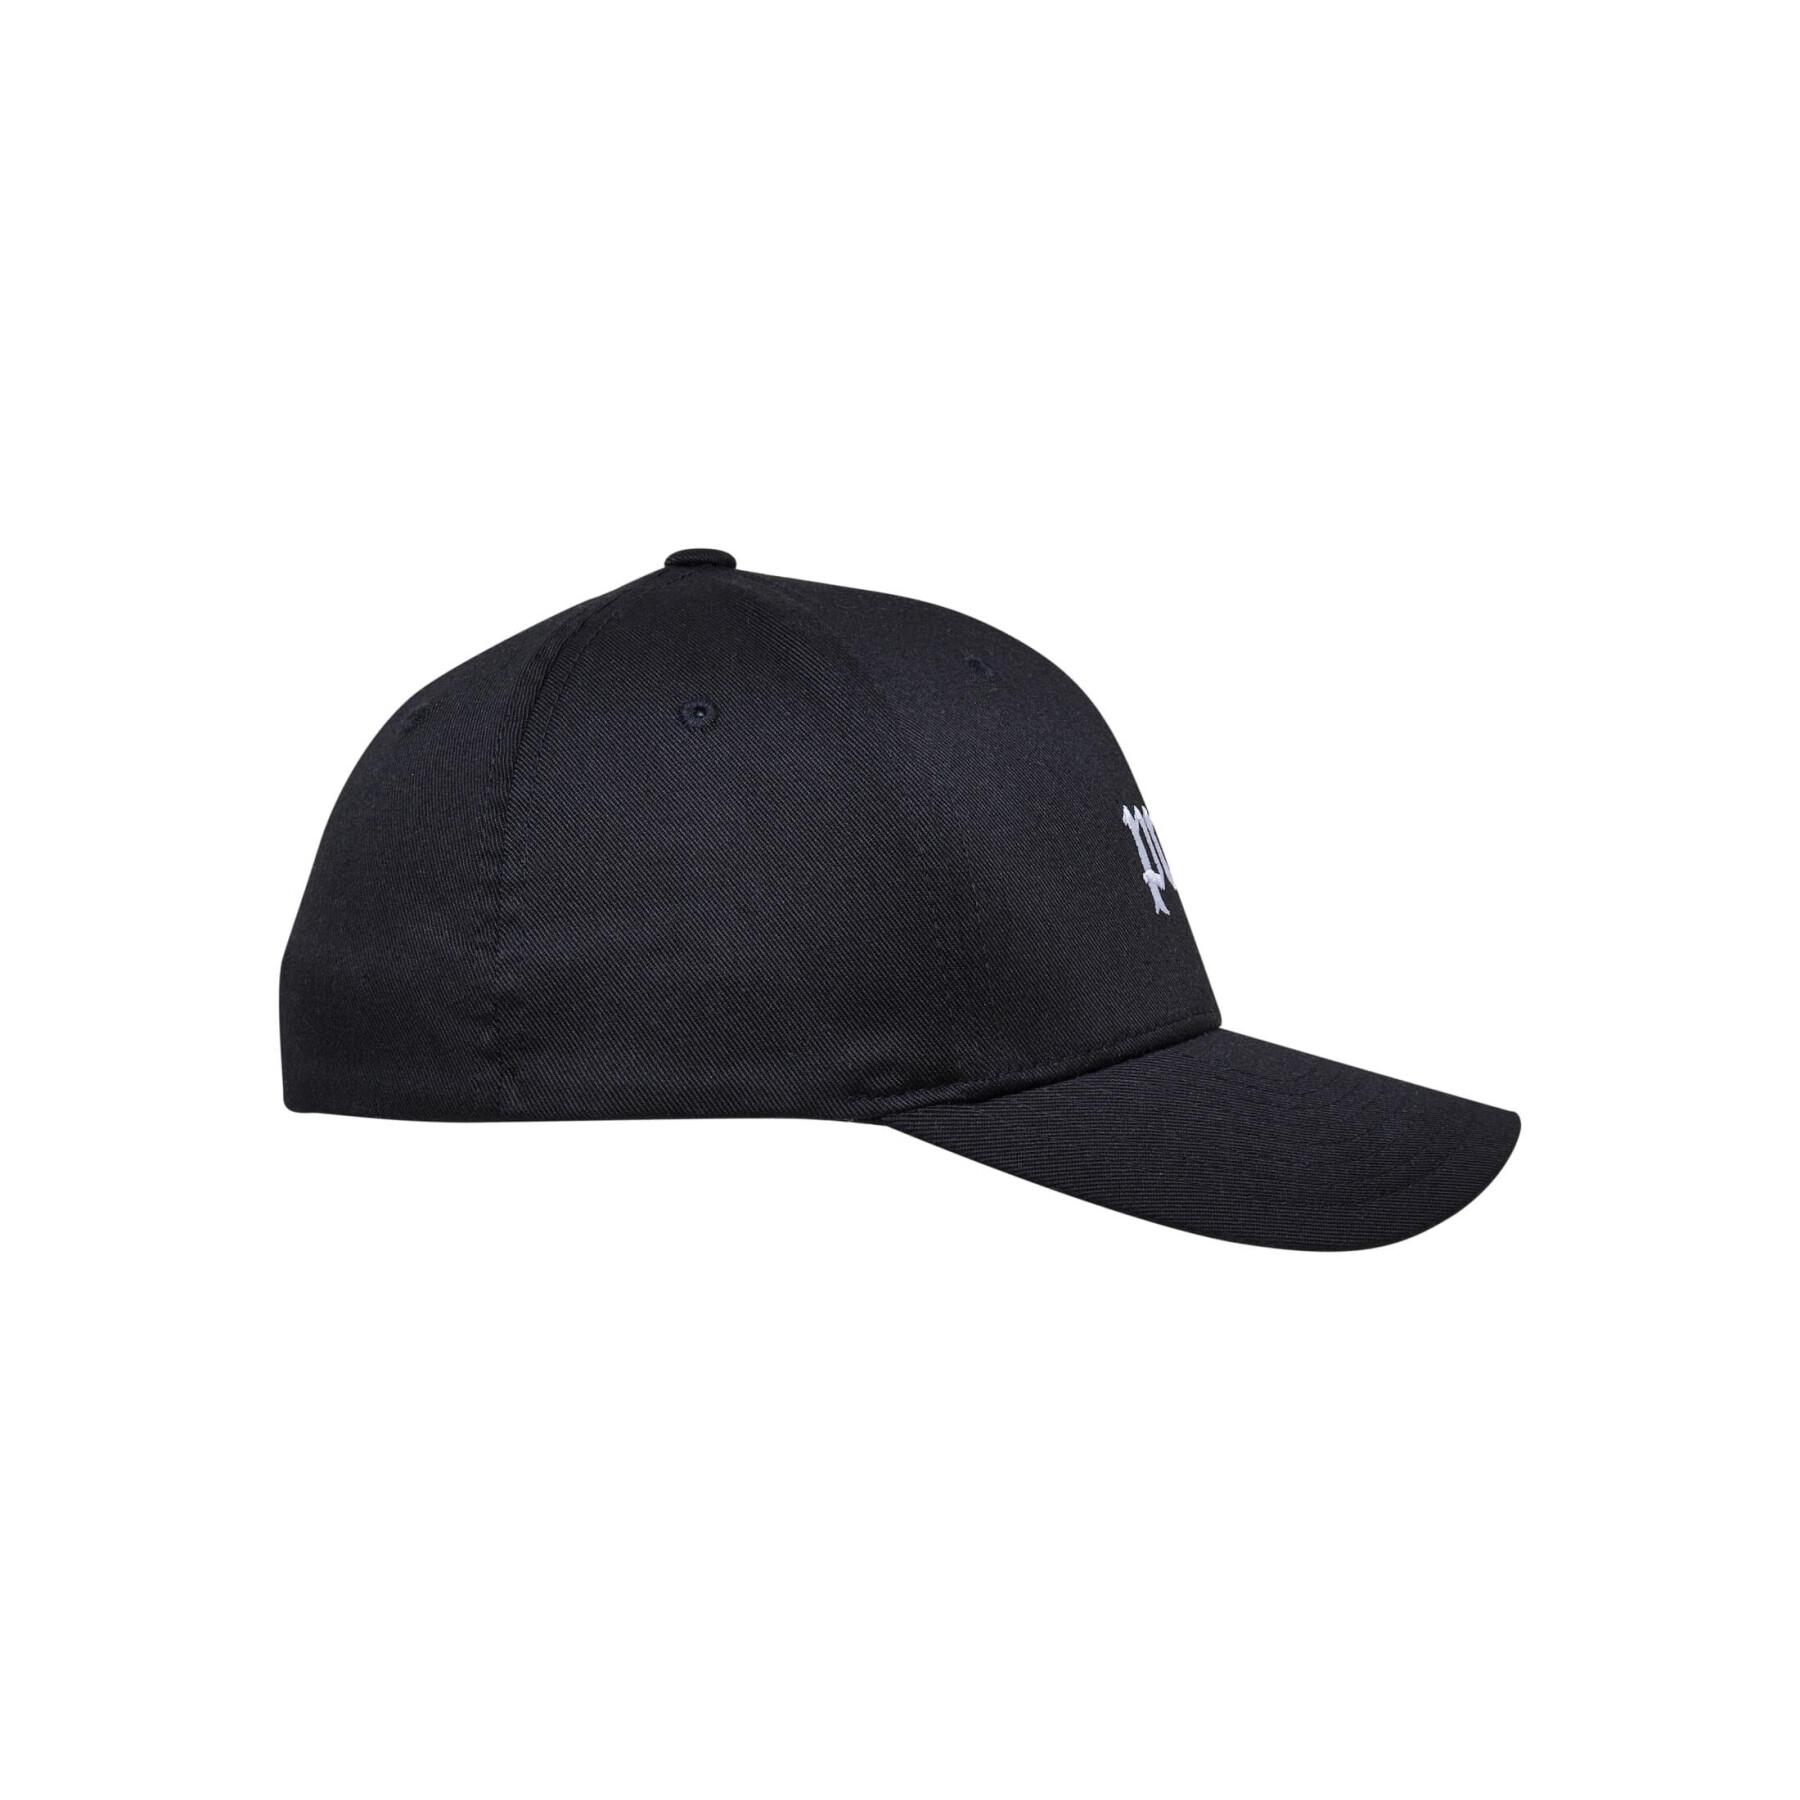 Cap Mister Tee Pray Wooly Combed - Baseball caps - Headwear - Accessories